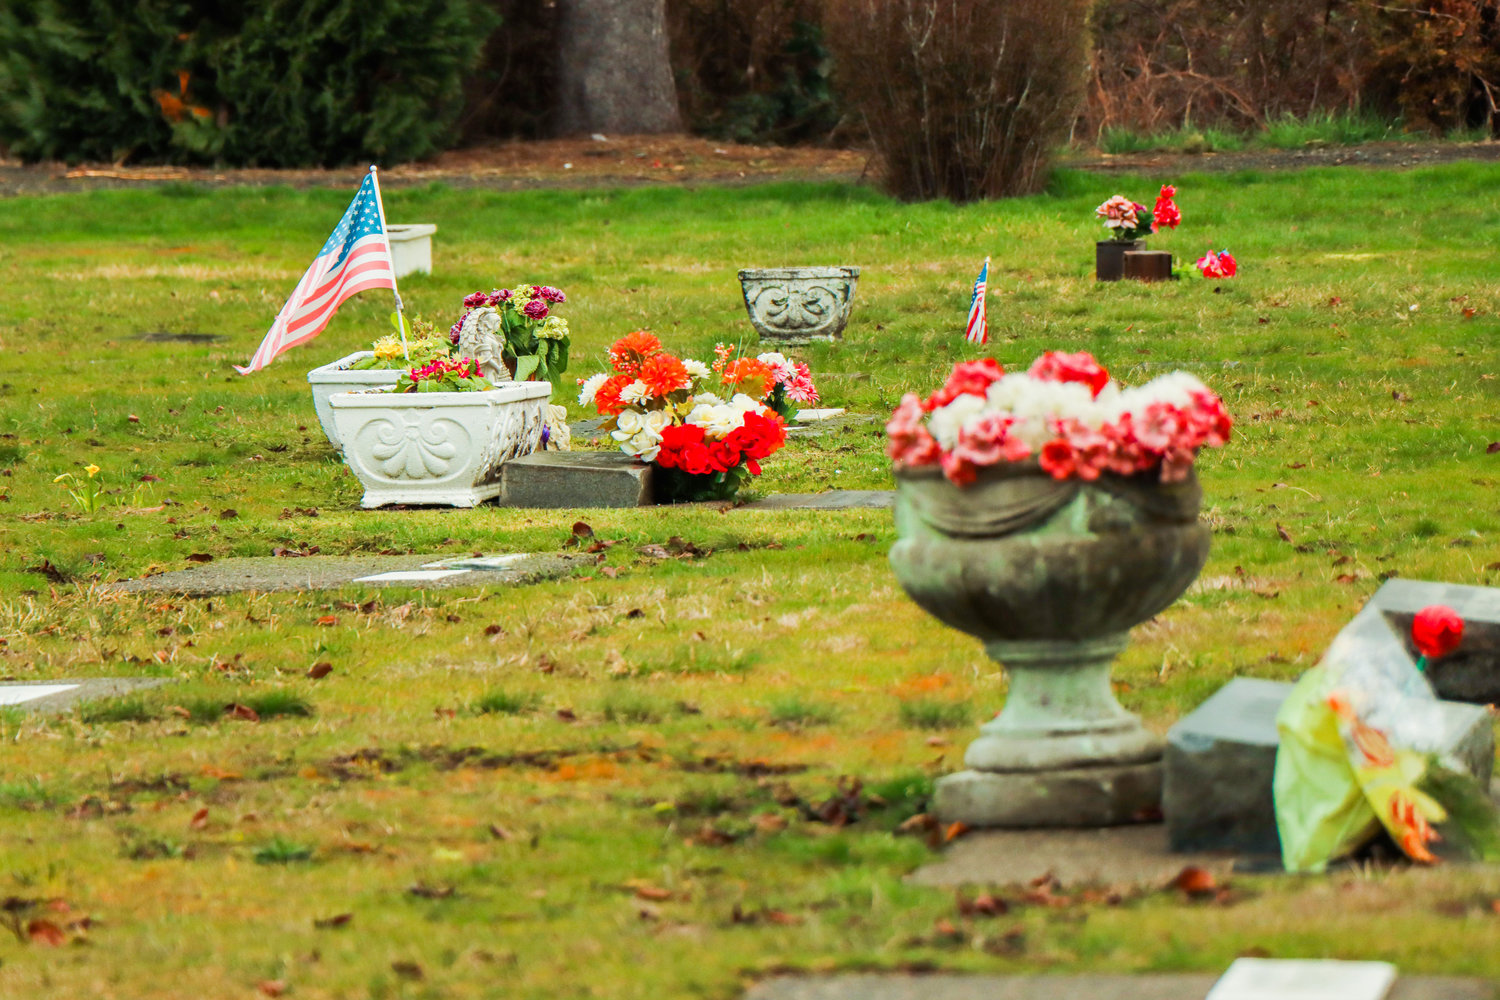 A flag waves near a gravesite inside the Greenwood Memorial Cemetery in Centralia on Friday.